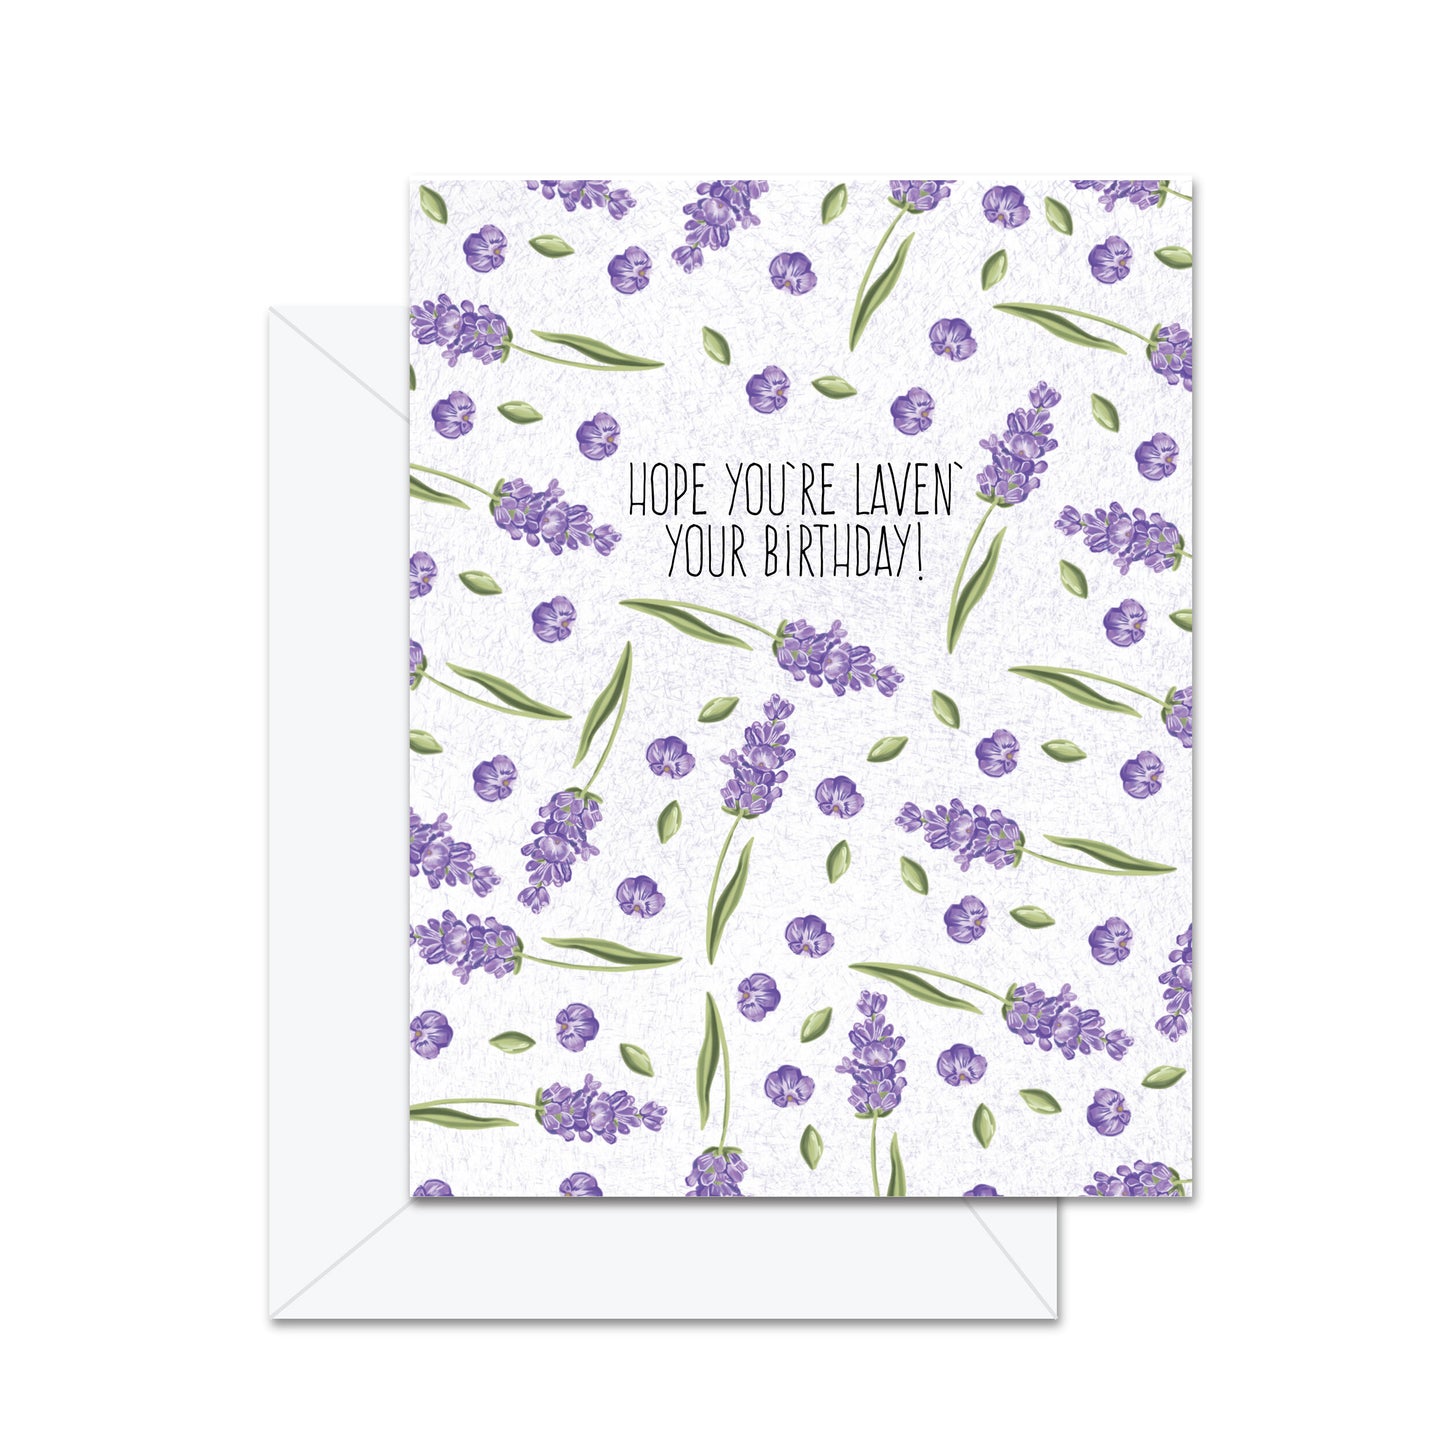 Hope You're Laven' Your Birthday! - Greeting Card